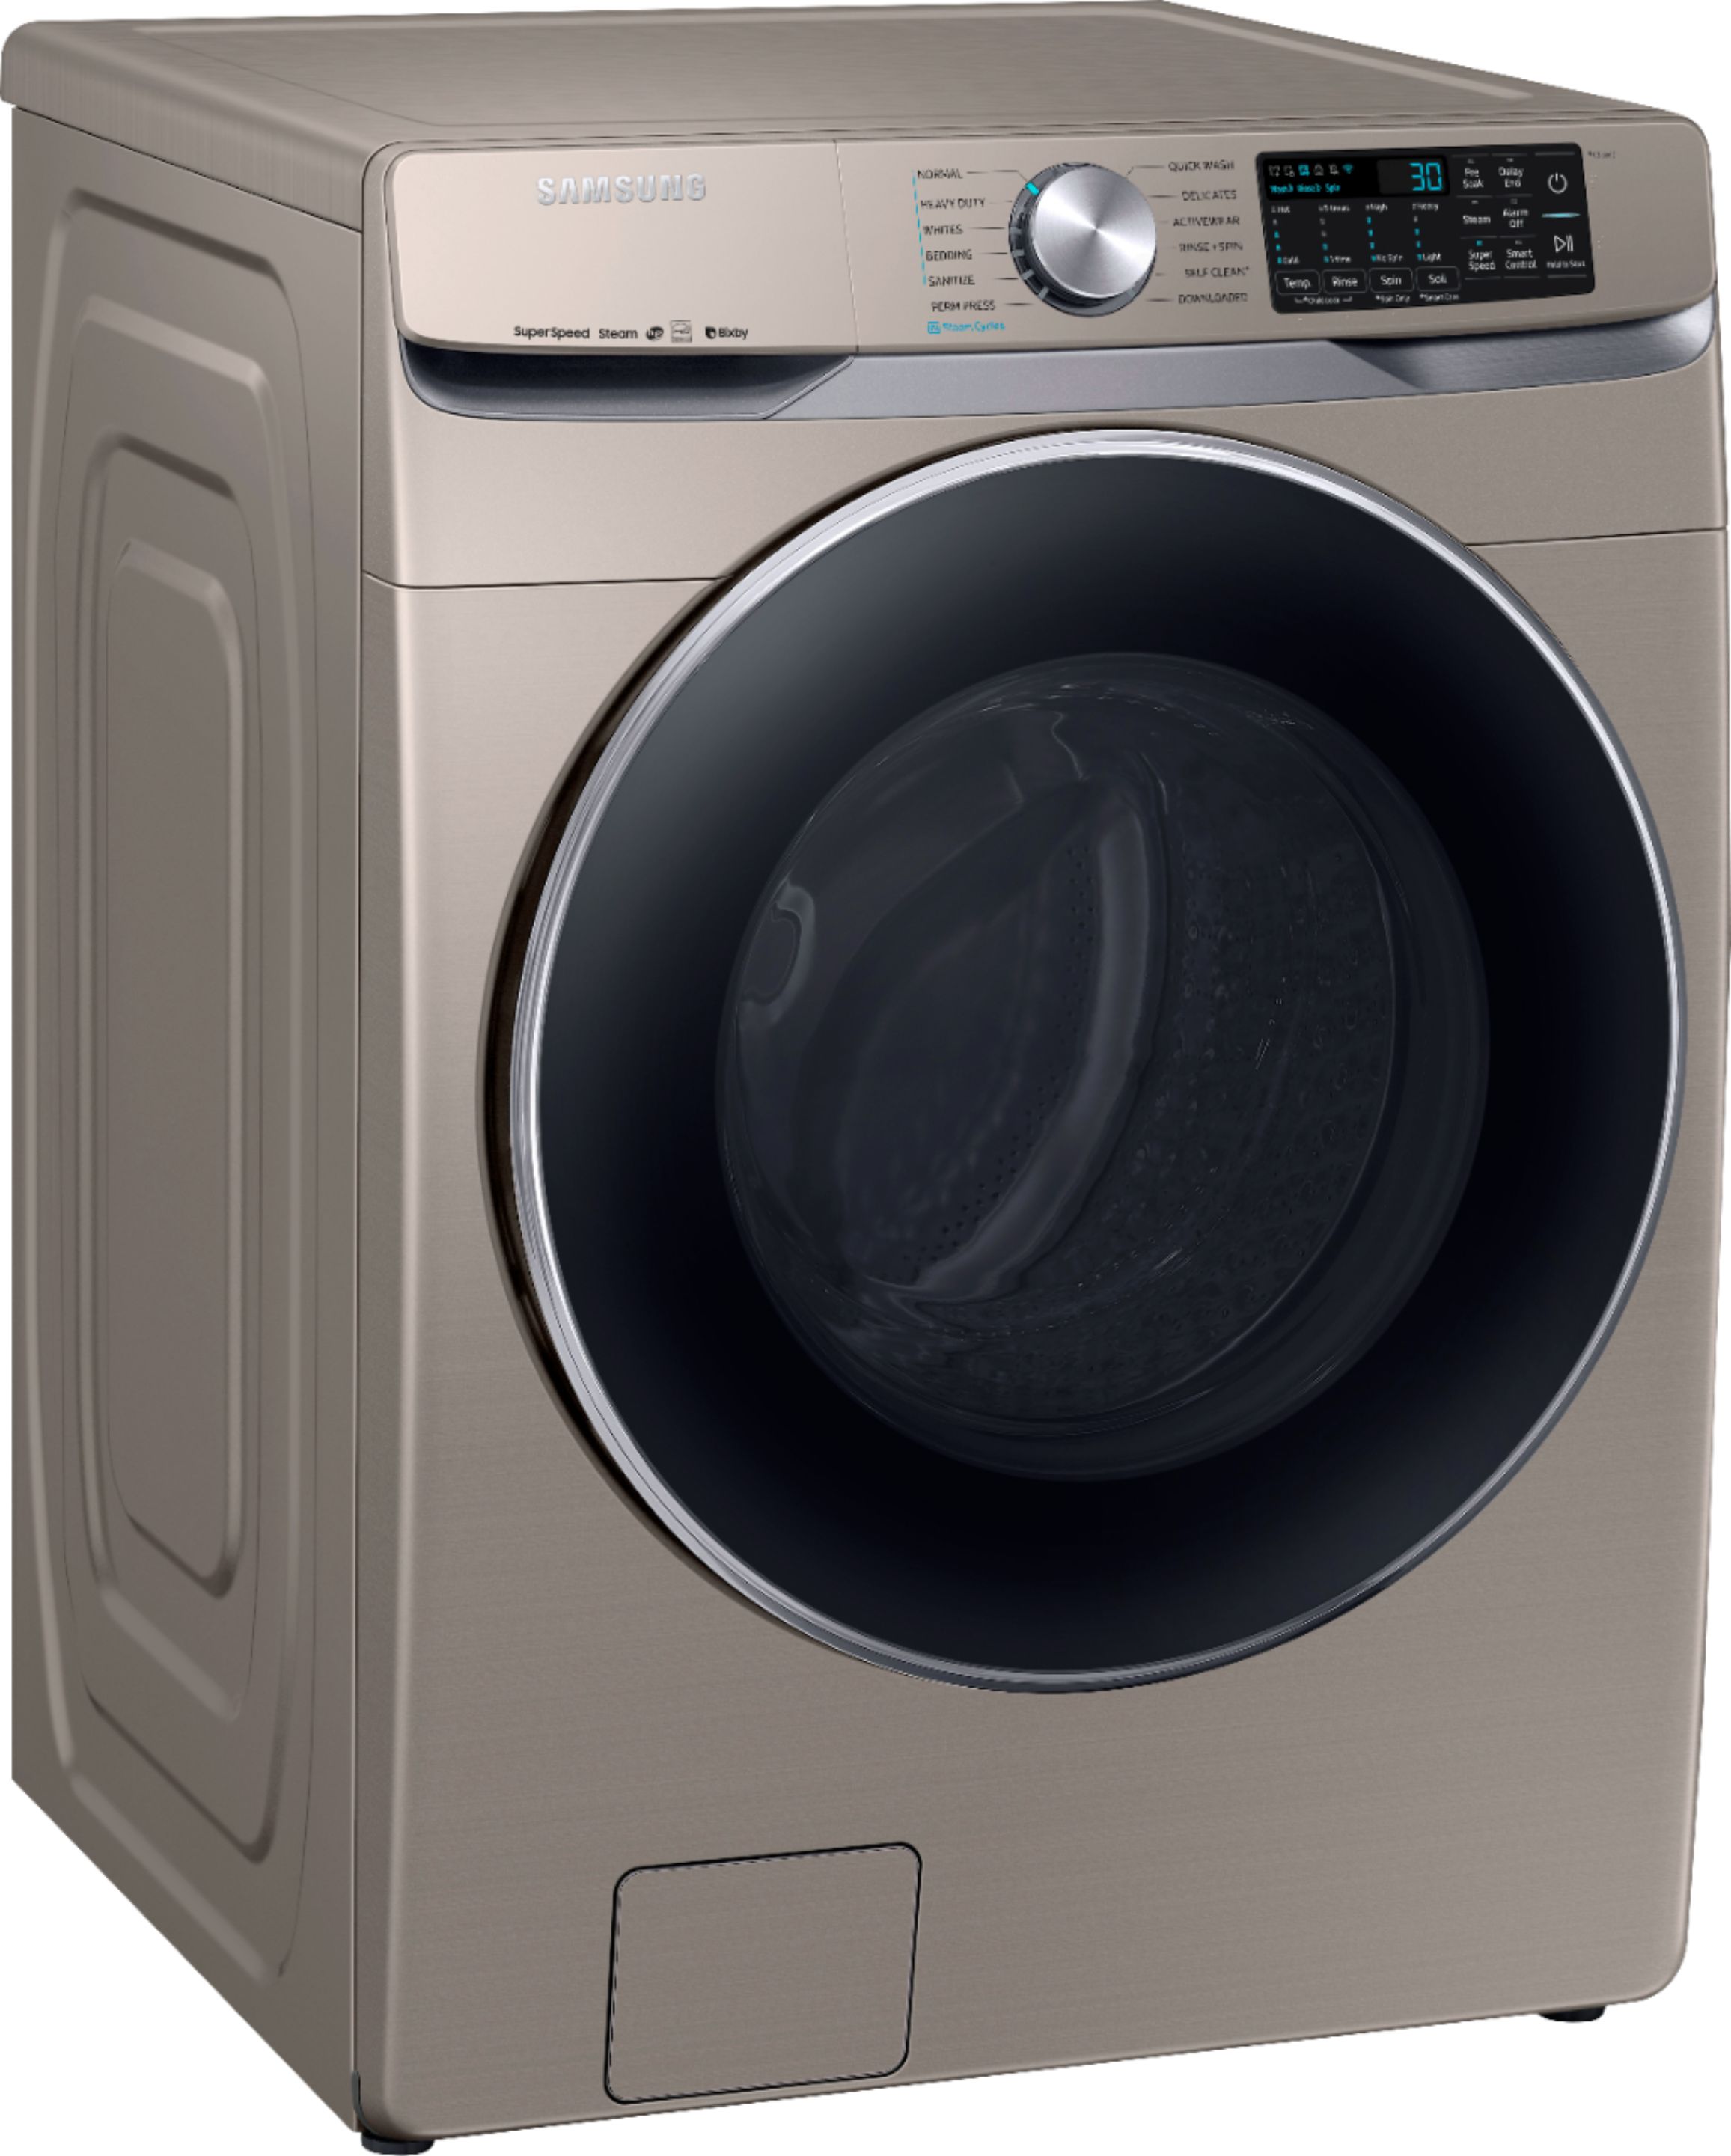 Angle View: Samsung - 4.5 Cu. Ft. High Efficiency Stackable Smart Front Load Washer with Steam and Super Speed - Champagne